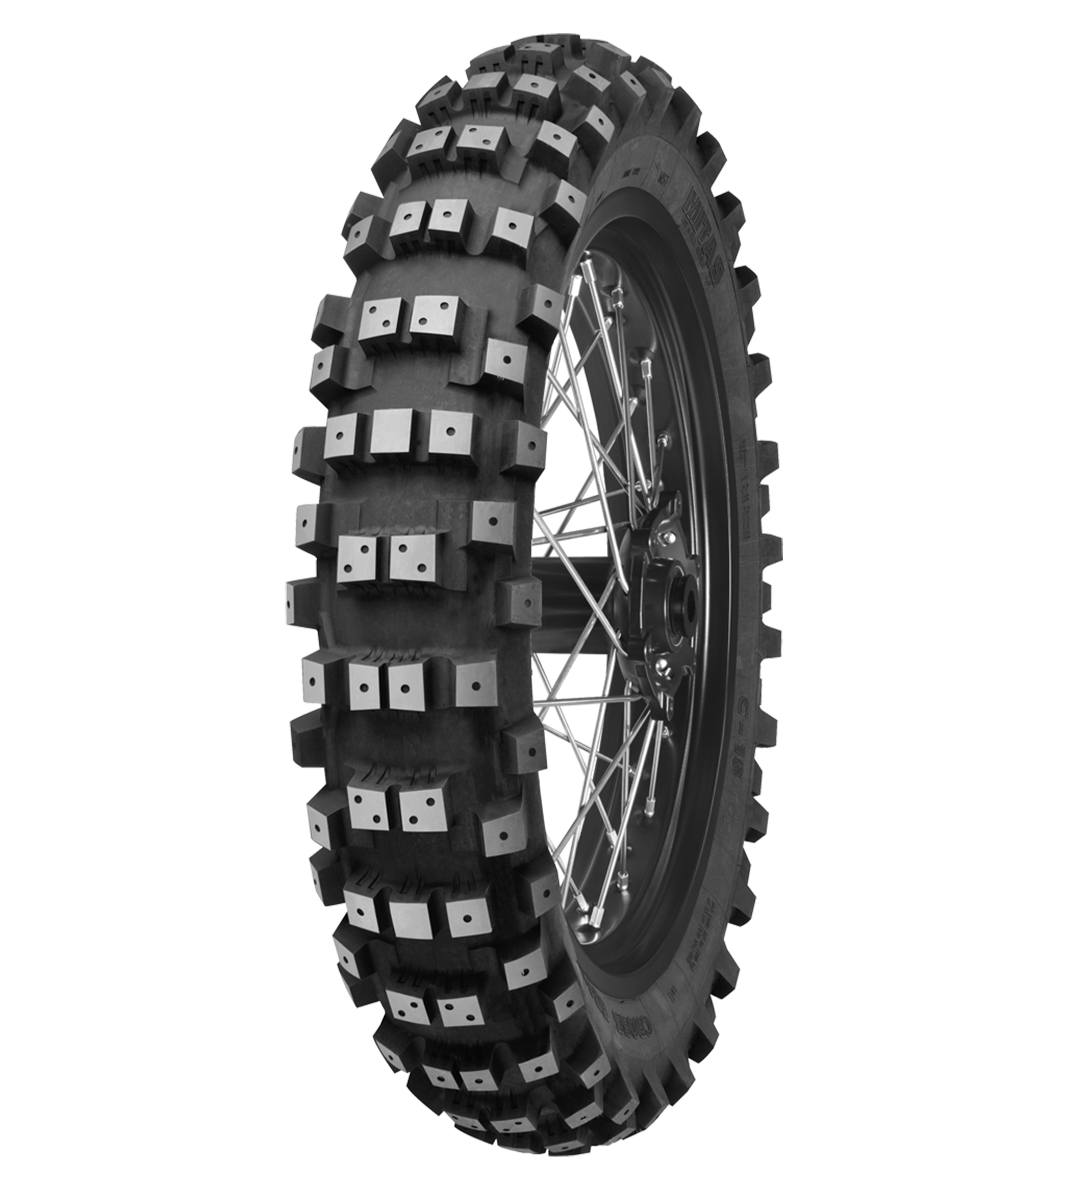 Mitas C-16 STONEATER 120/90-19 All-Terrain Off-Road 66N No Stripe Tube Rear Tire, 226554, 120/90-19, All-Terrain, C-16 StonEater, Off-Road, Rear, Tires - Imported and distributed in North & South America by Lindeco Genuine Powersports - Premier Powersports Equipment and Accessories for Motorcycle Enthusiasts, Professional Riders and Dealers.